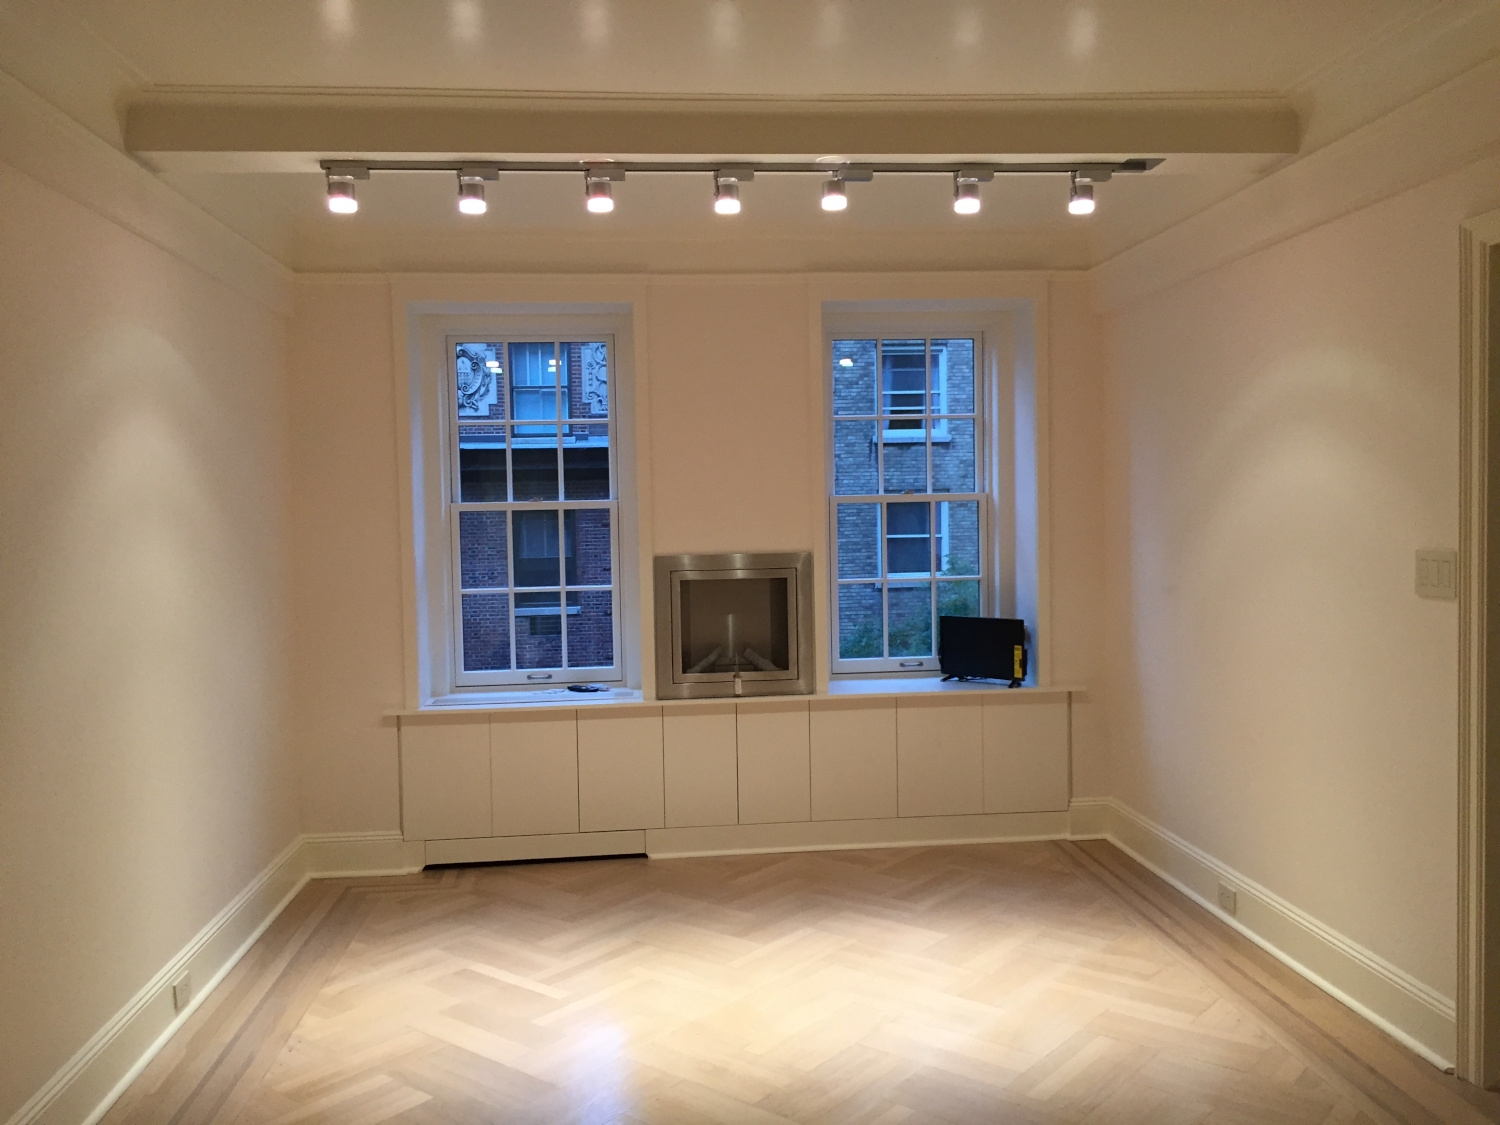 Interior view of an apartment in Manhattan featuring new partitions, wall bench cabinets, refinished flooring, freshly painted walls, new lighting, and an electric fireplace